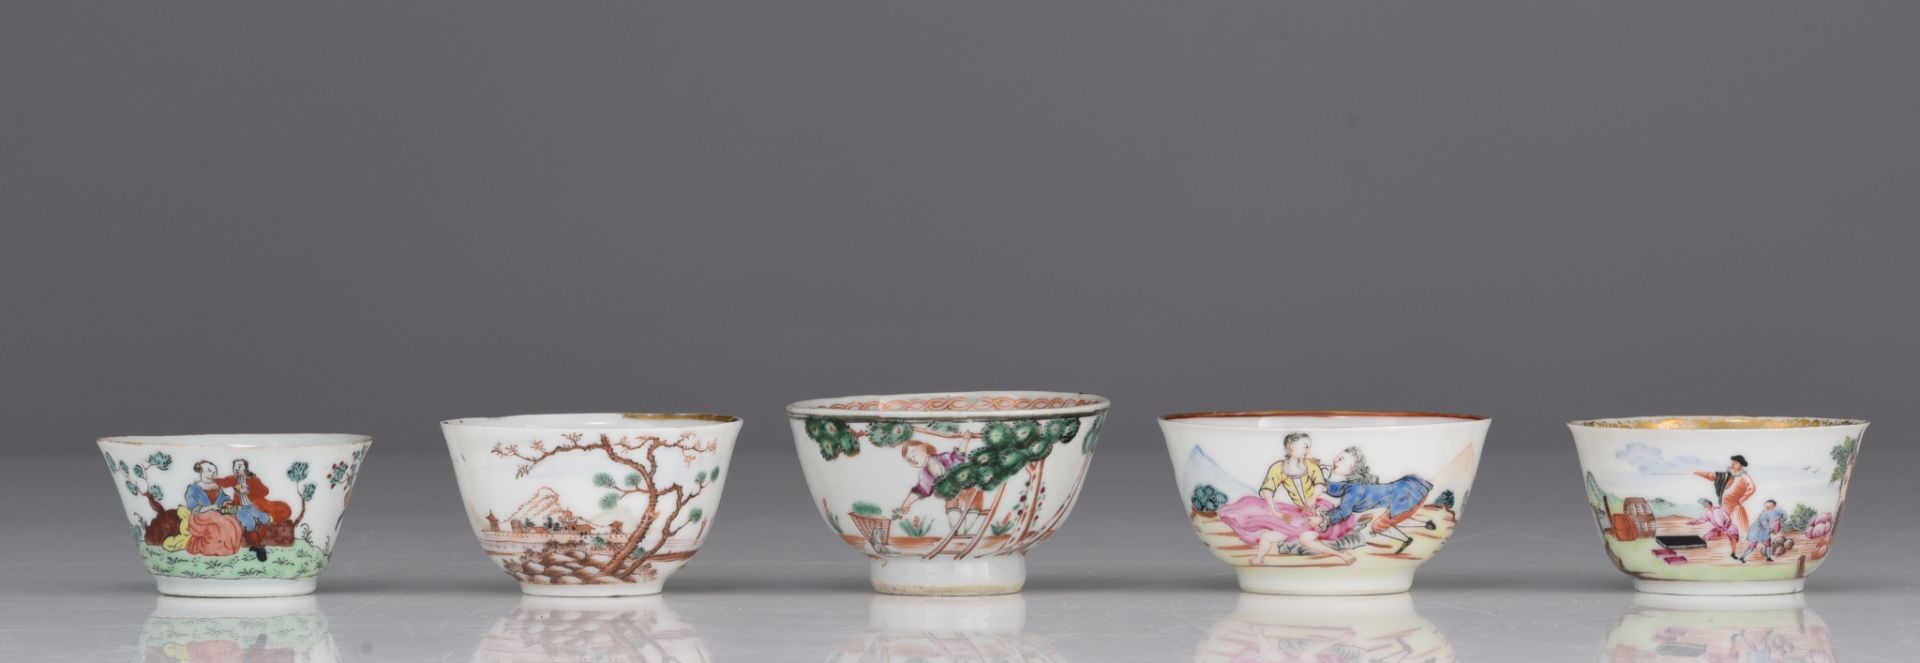 (BIDDING ONLY ON CARLOBONTE.BE) A collection of five matching sets of Chinese famille rose export te - Image 15 of 24